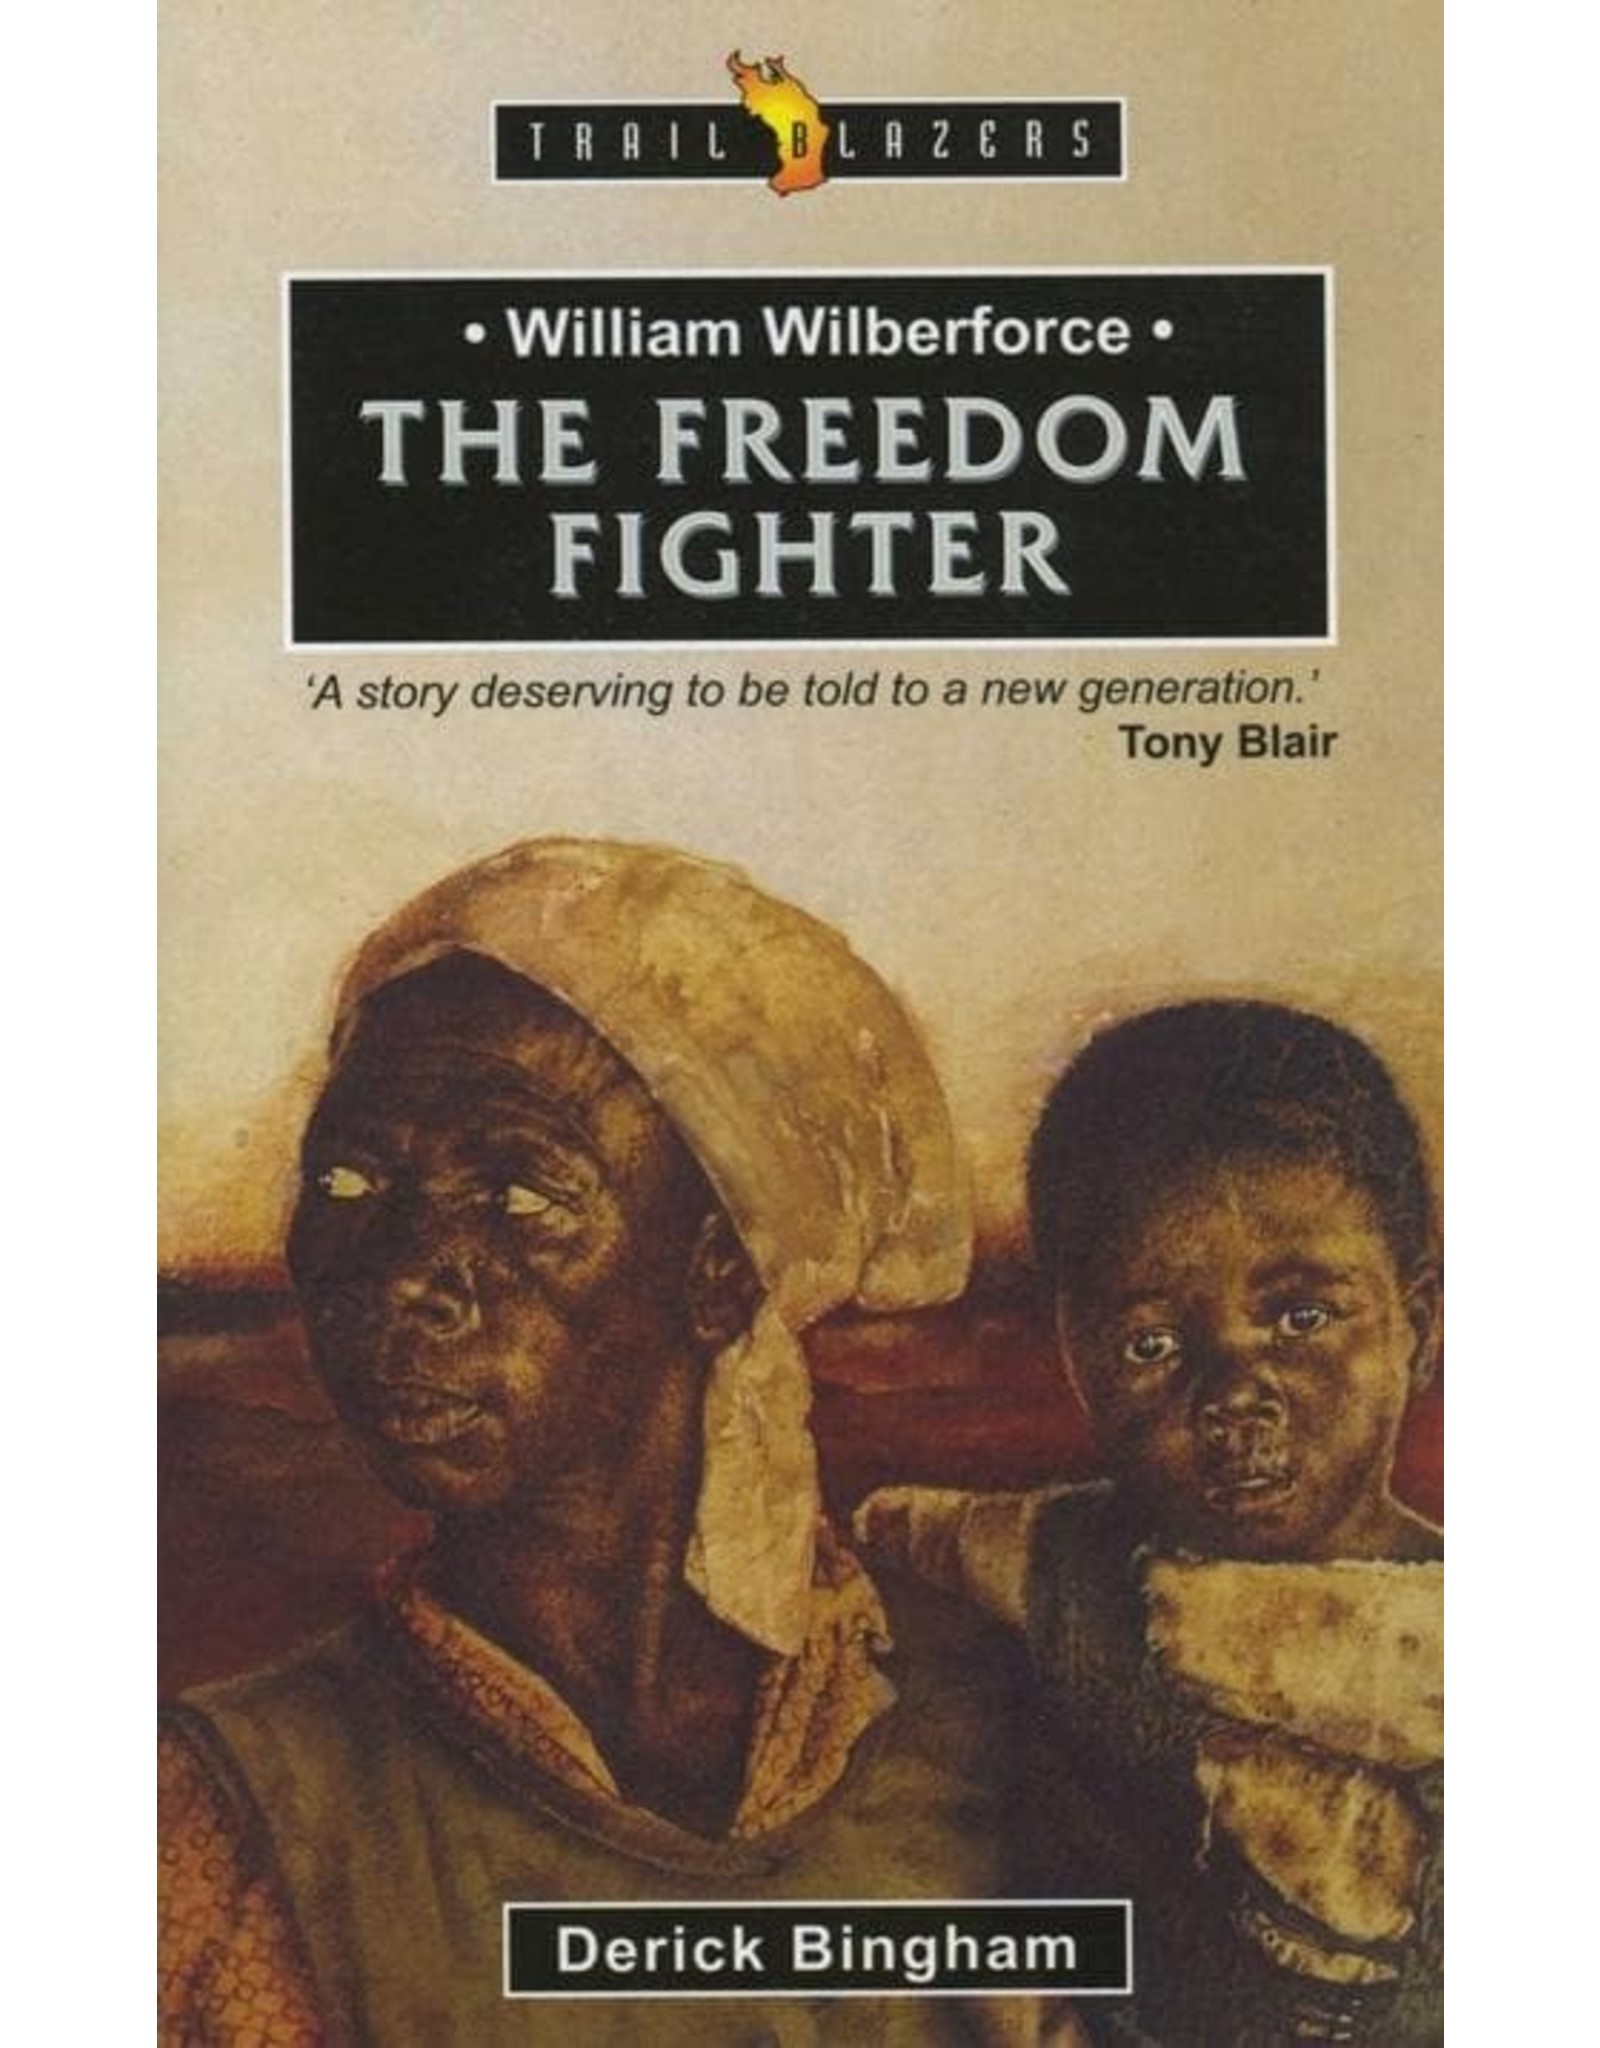 William Wilberforce - The Freedom Fighter